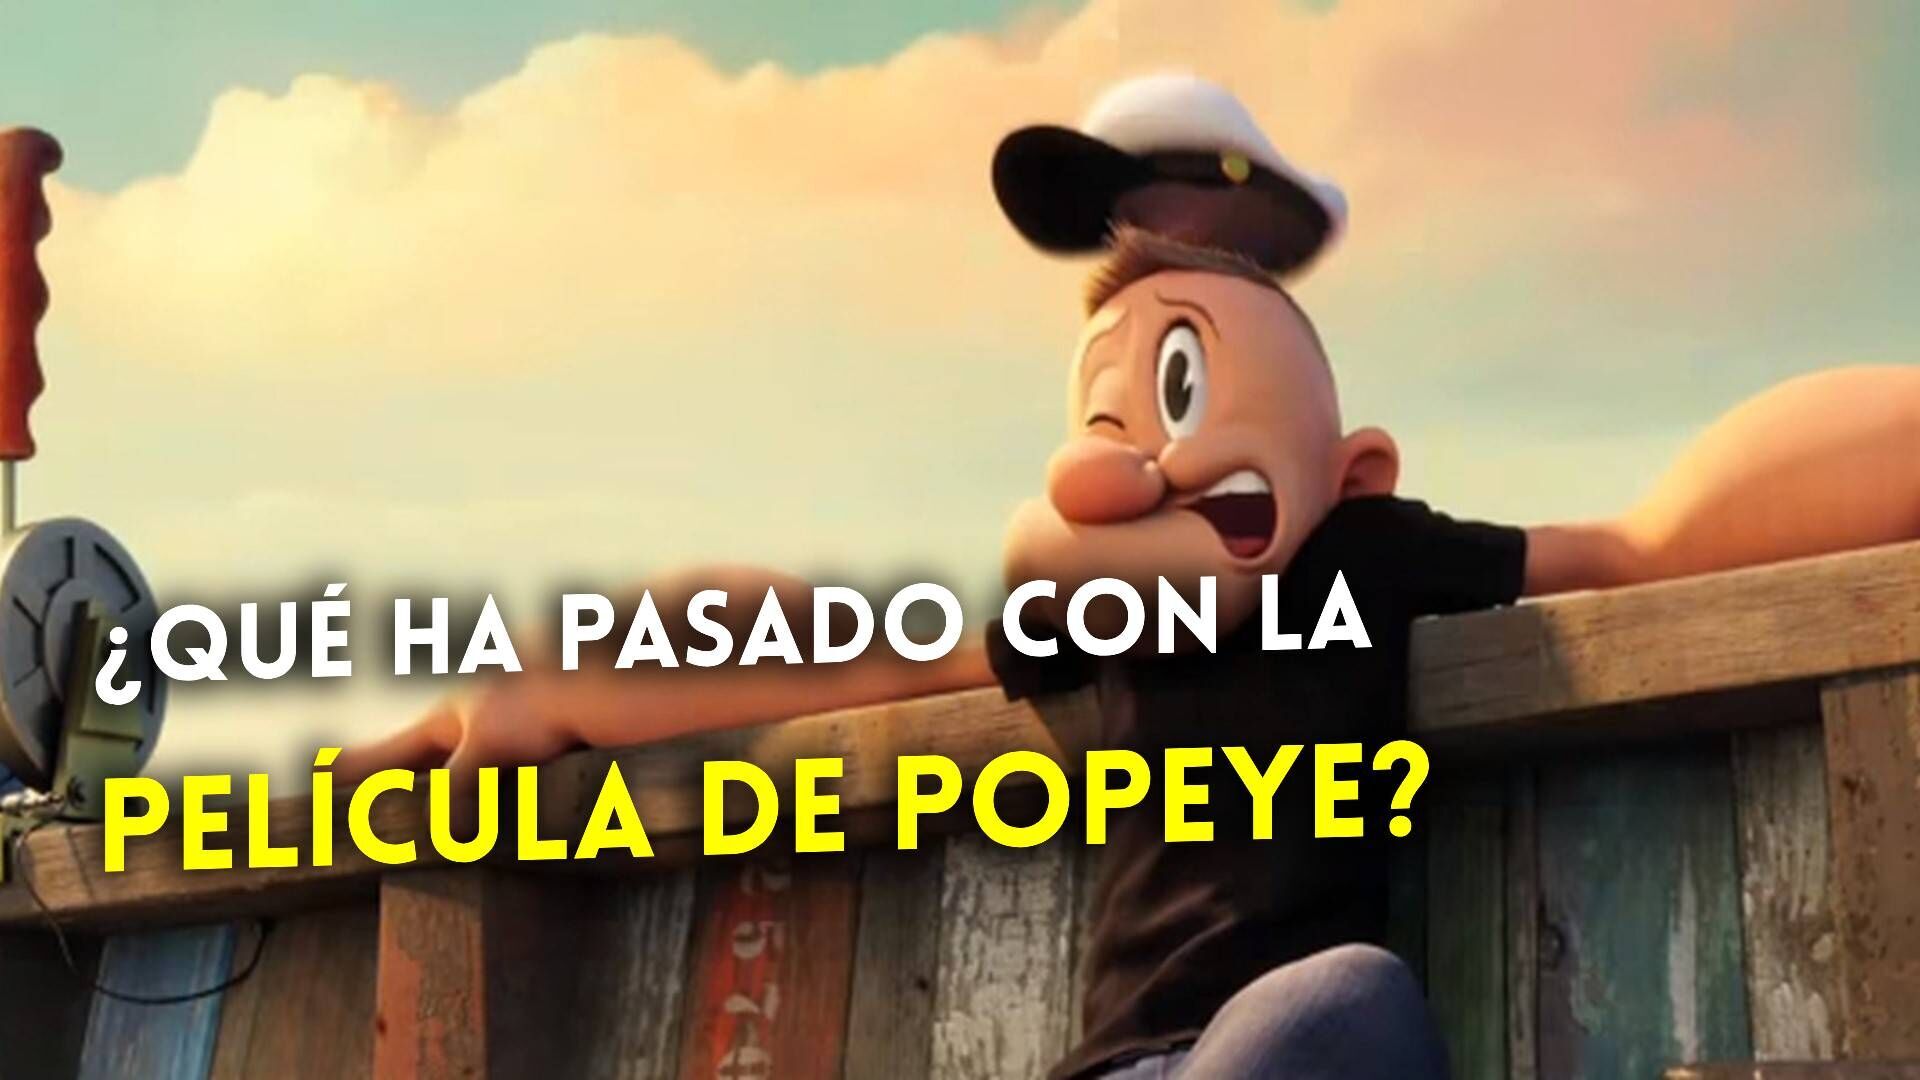 Popeye cancelled movie leaked